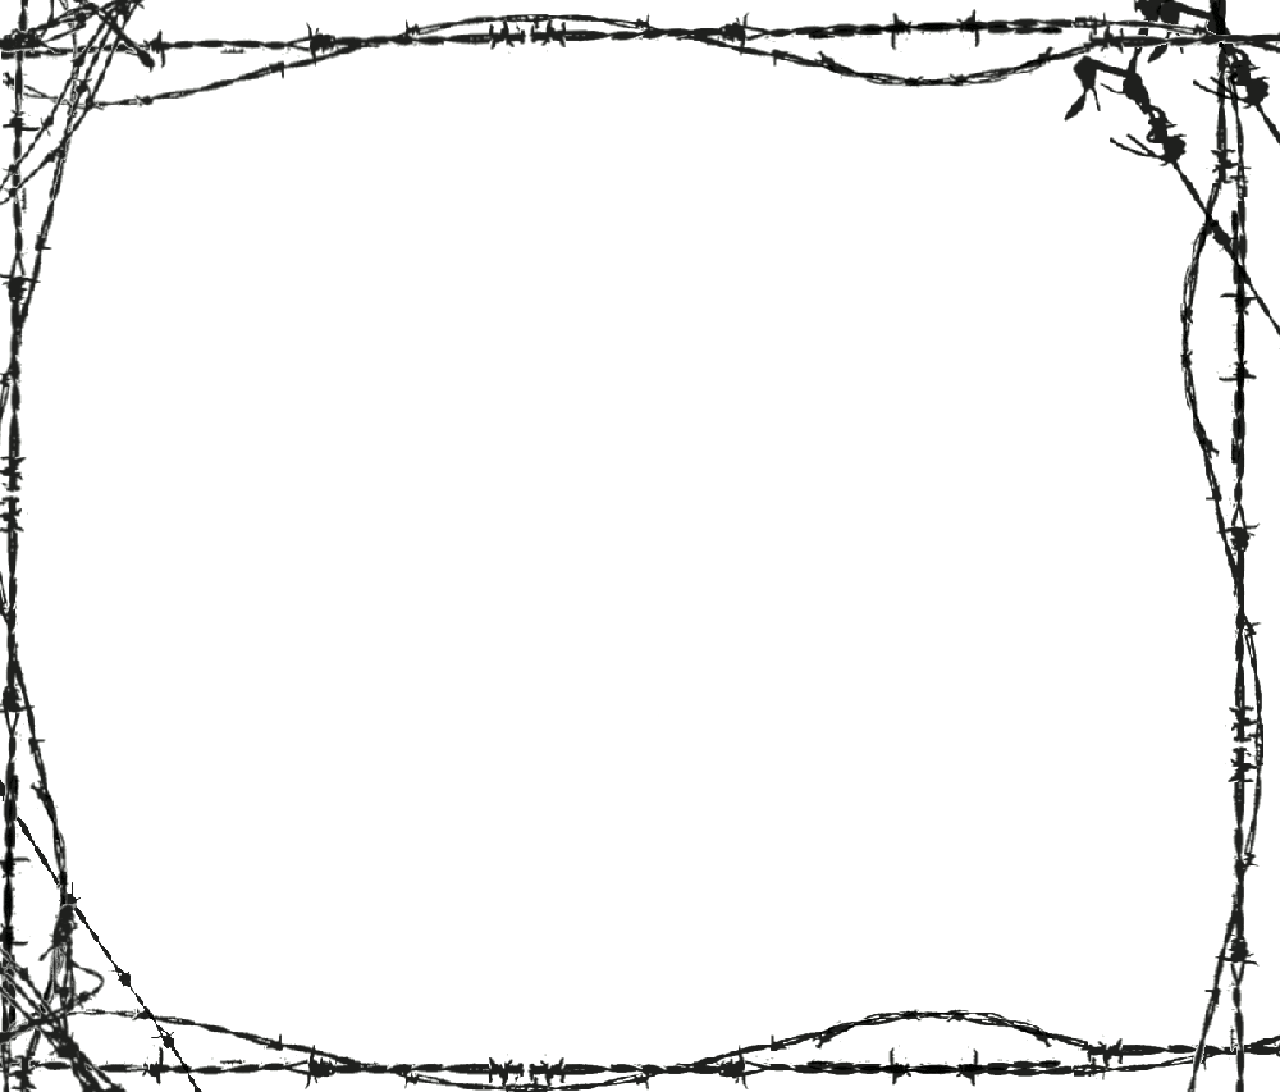 barbed wire, vector vector an